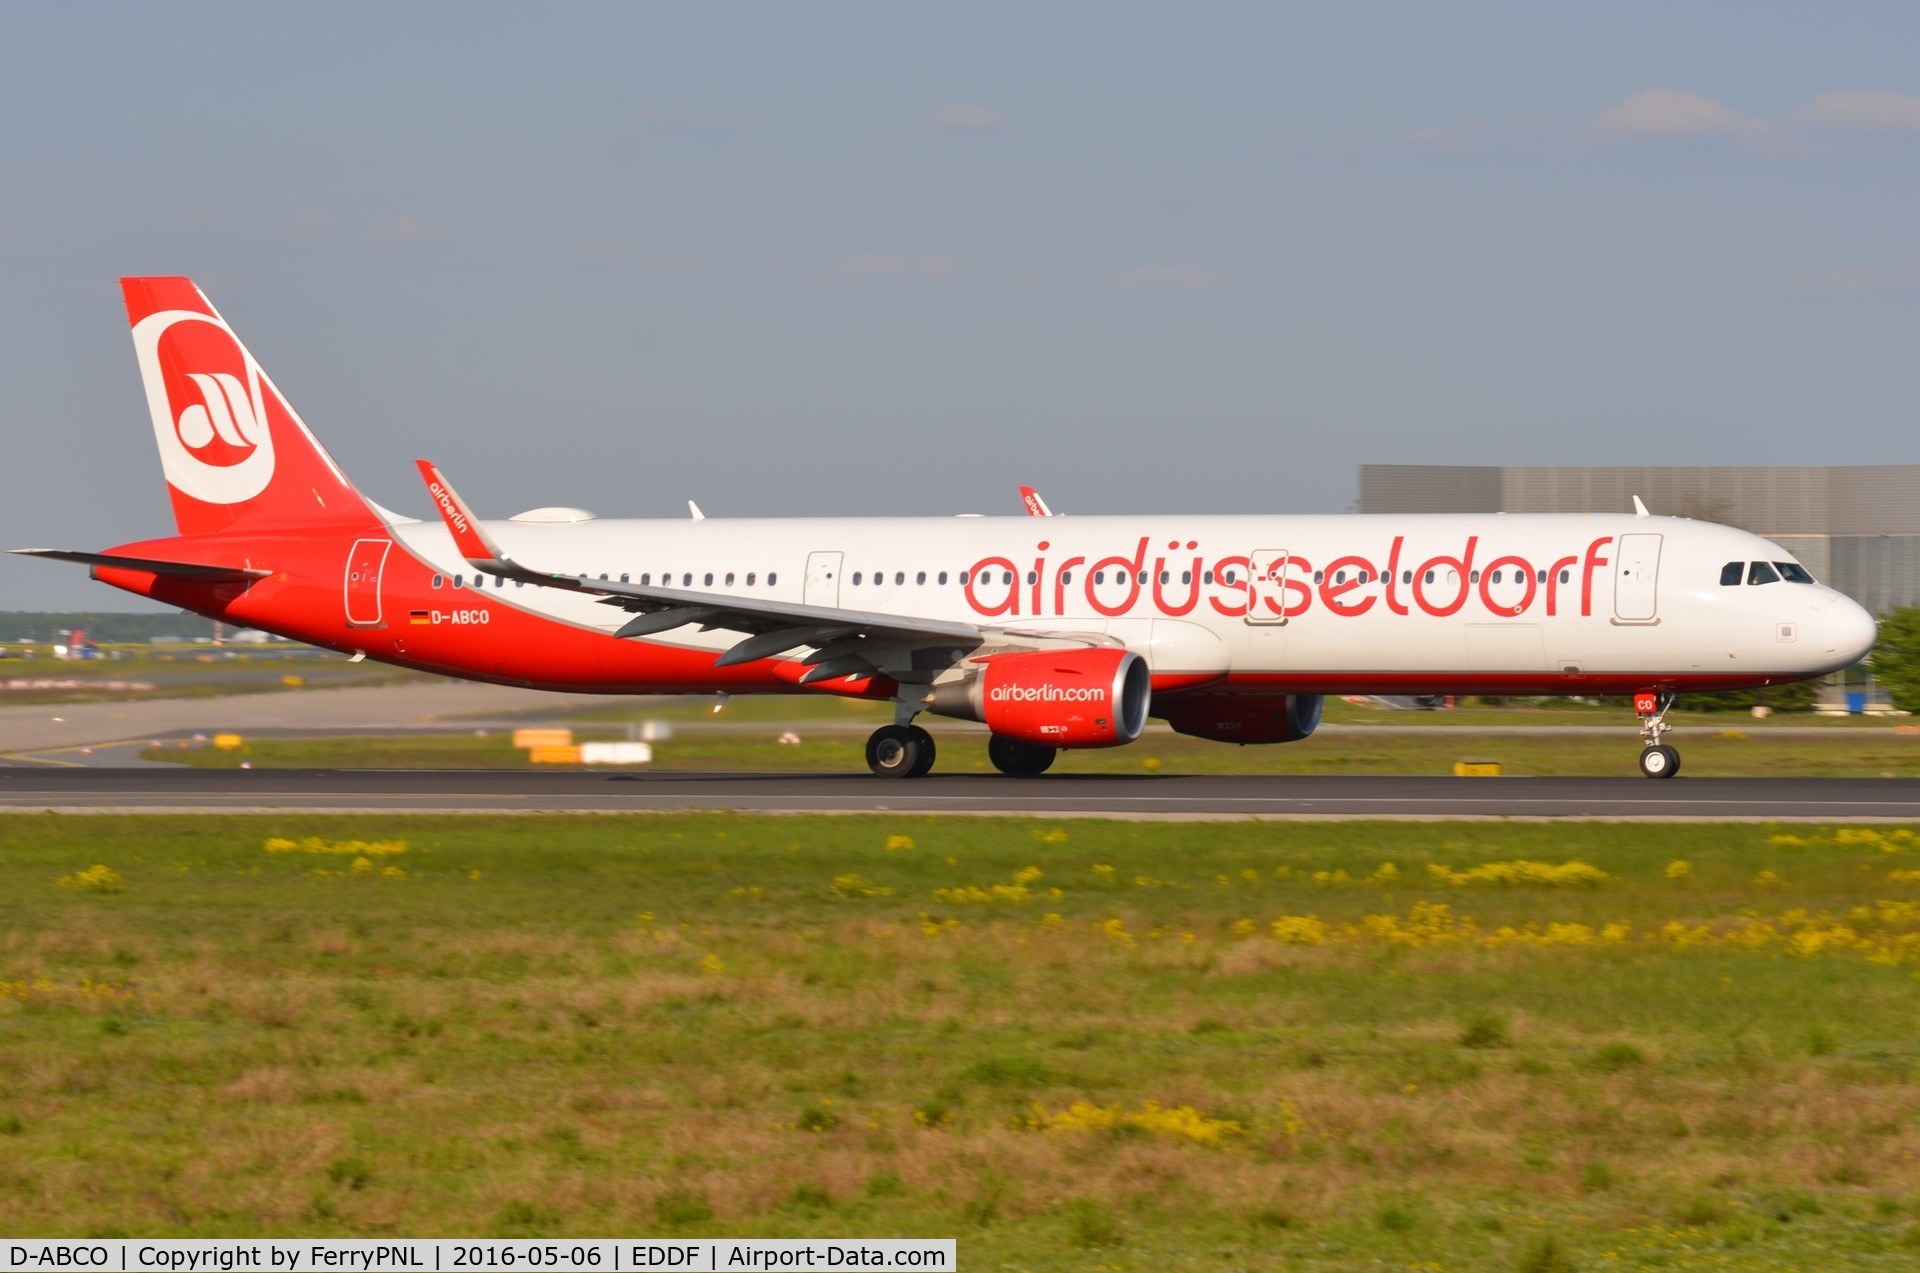 D-ABCO, 2015 Airbus A321-211 C/N 6501, And they say Germans don't have a sense of humor